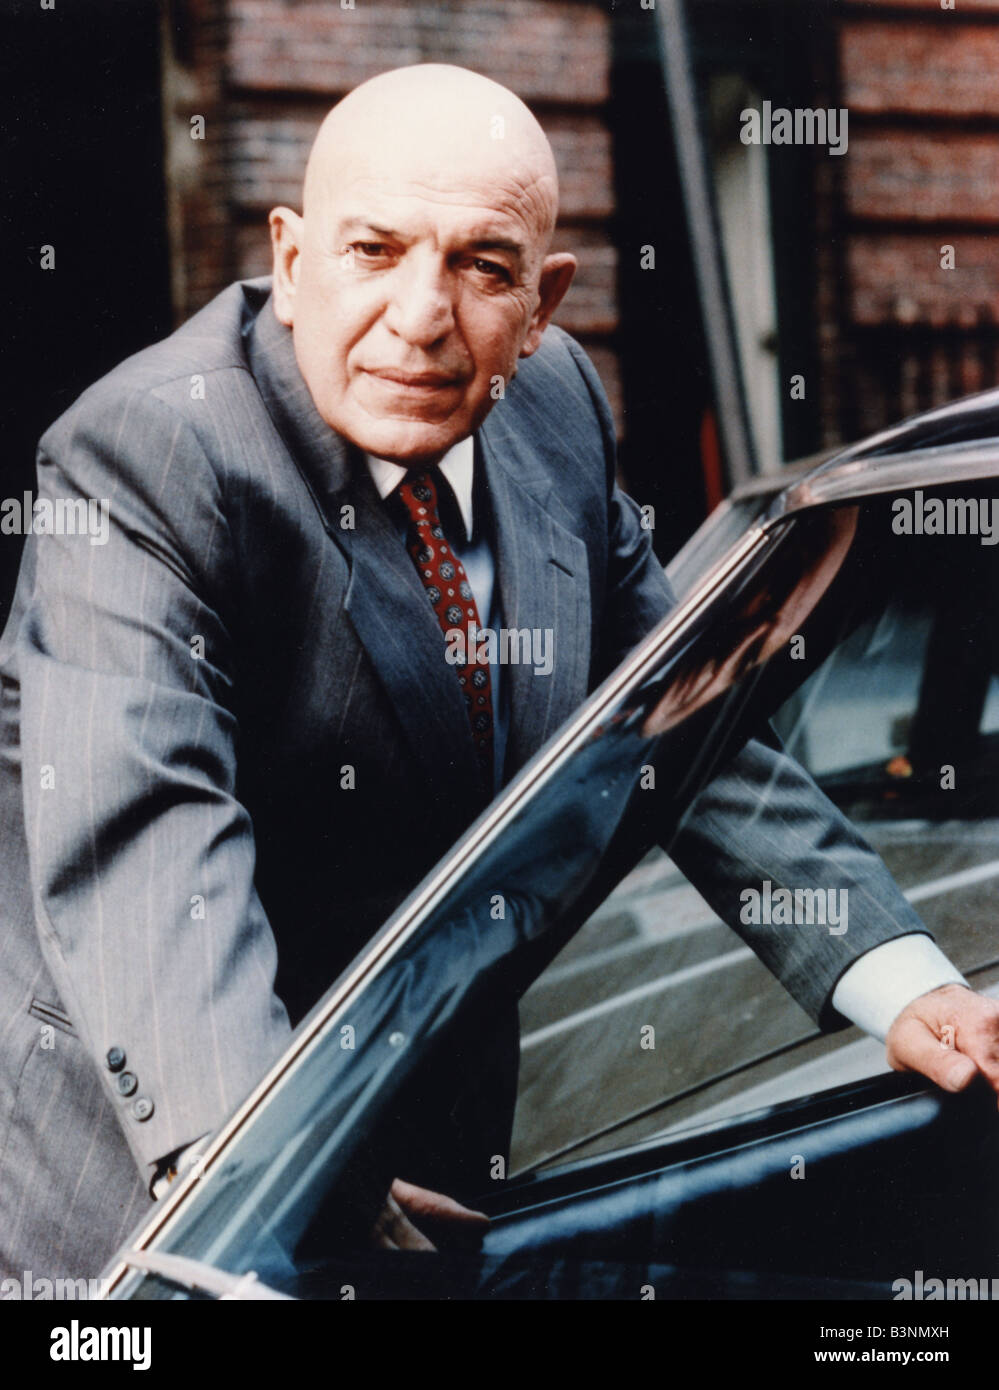 KOJAK  Universal TV police series  with Telly Savalas who appeared in 118 episodes from 1973 to 1978 Stock Photo